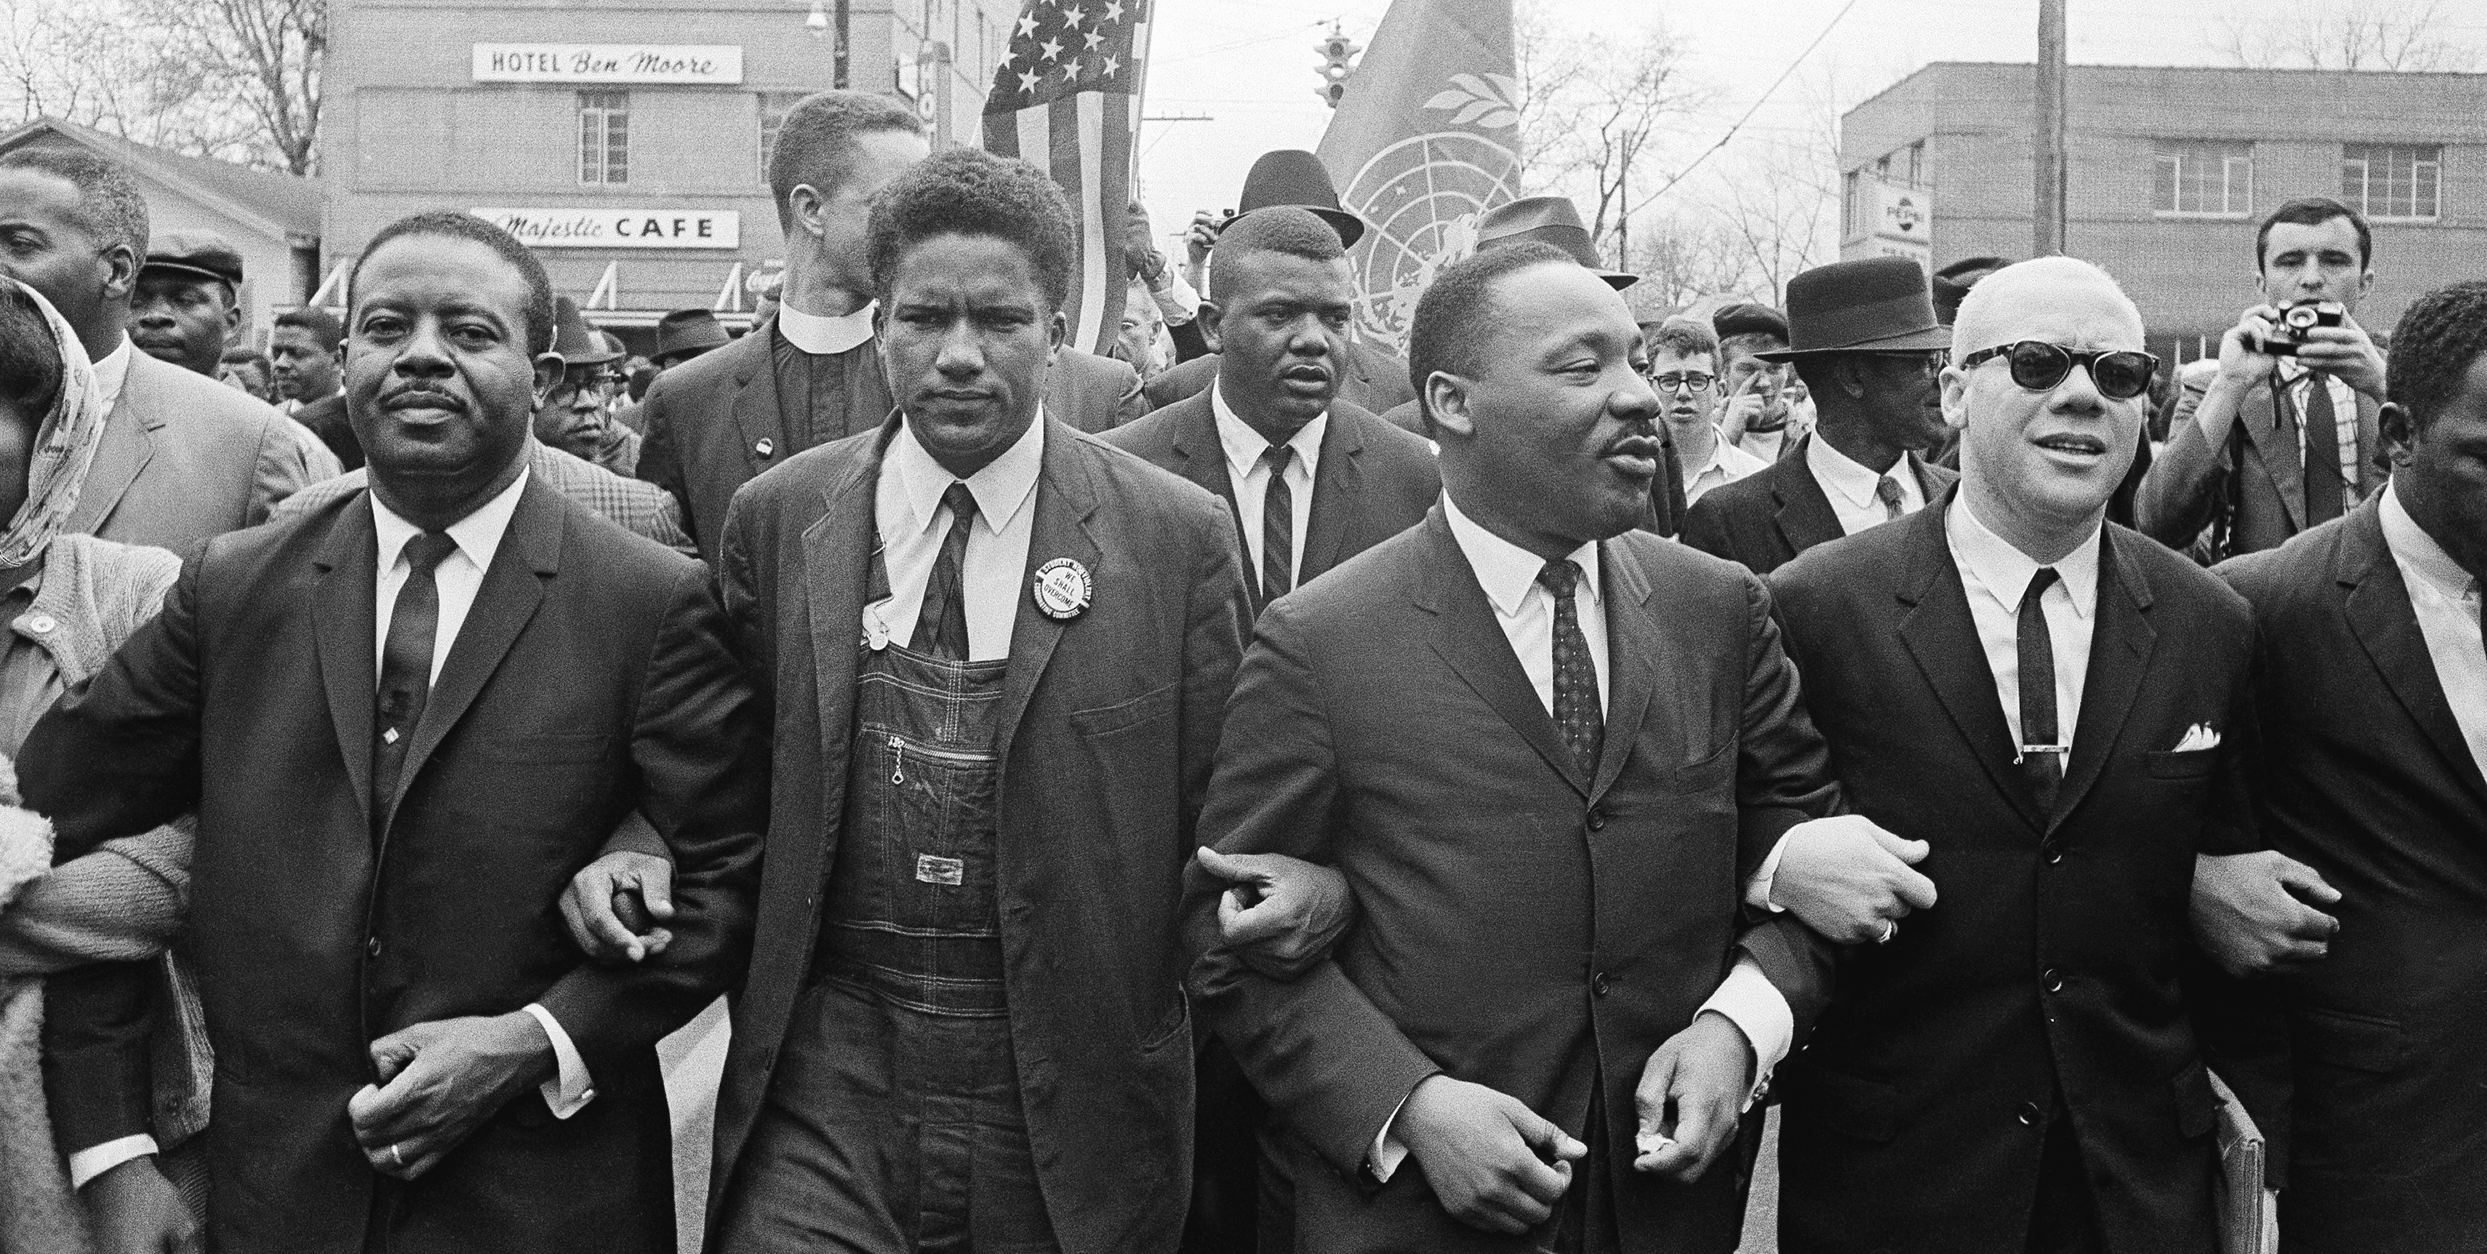 Dr. Martin Luther King, Jr. locks arms with his aides as he leads a march of several thousands on March 17, 1965 in Montgomery, Ala. (Credit: AP)